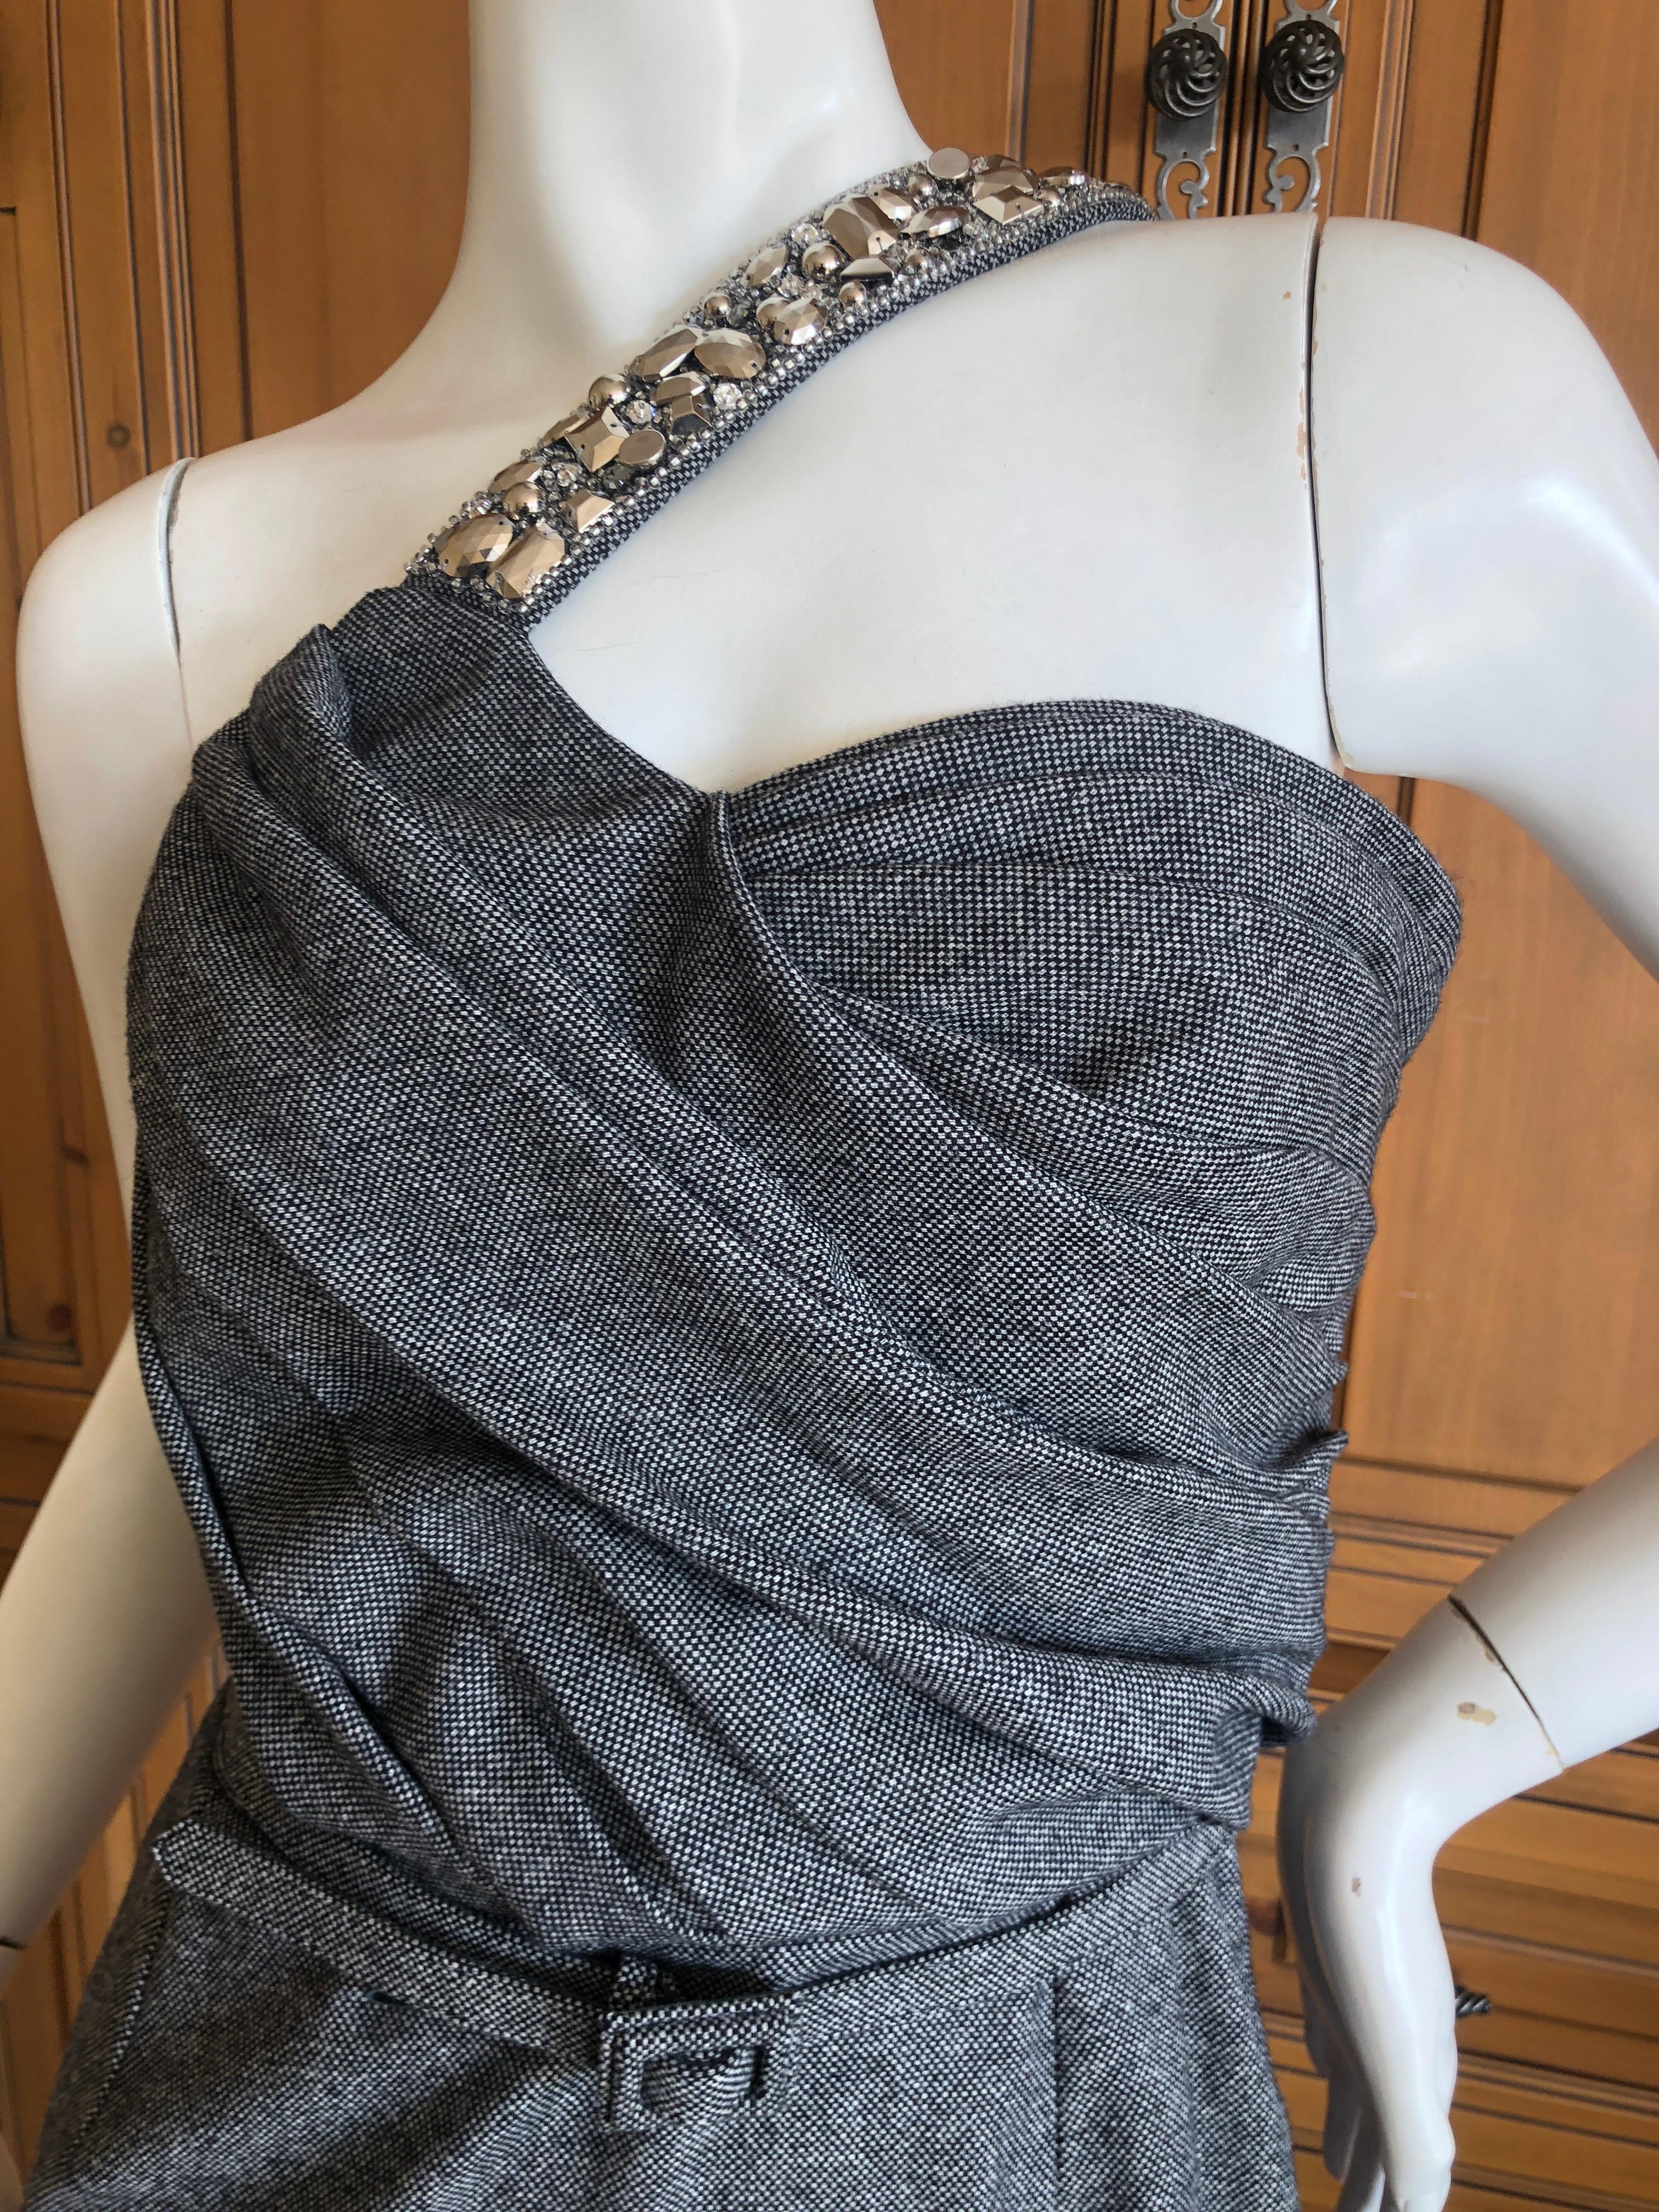 Christian Dior John Galliano Gray Tweed Cocktail Dress with Jewel Shoulder Strap In Excellent Condition For Sale In Cloverdale, CA